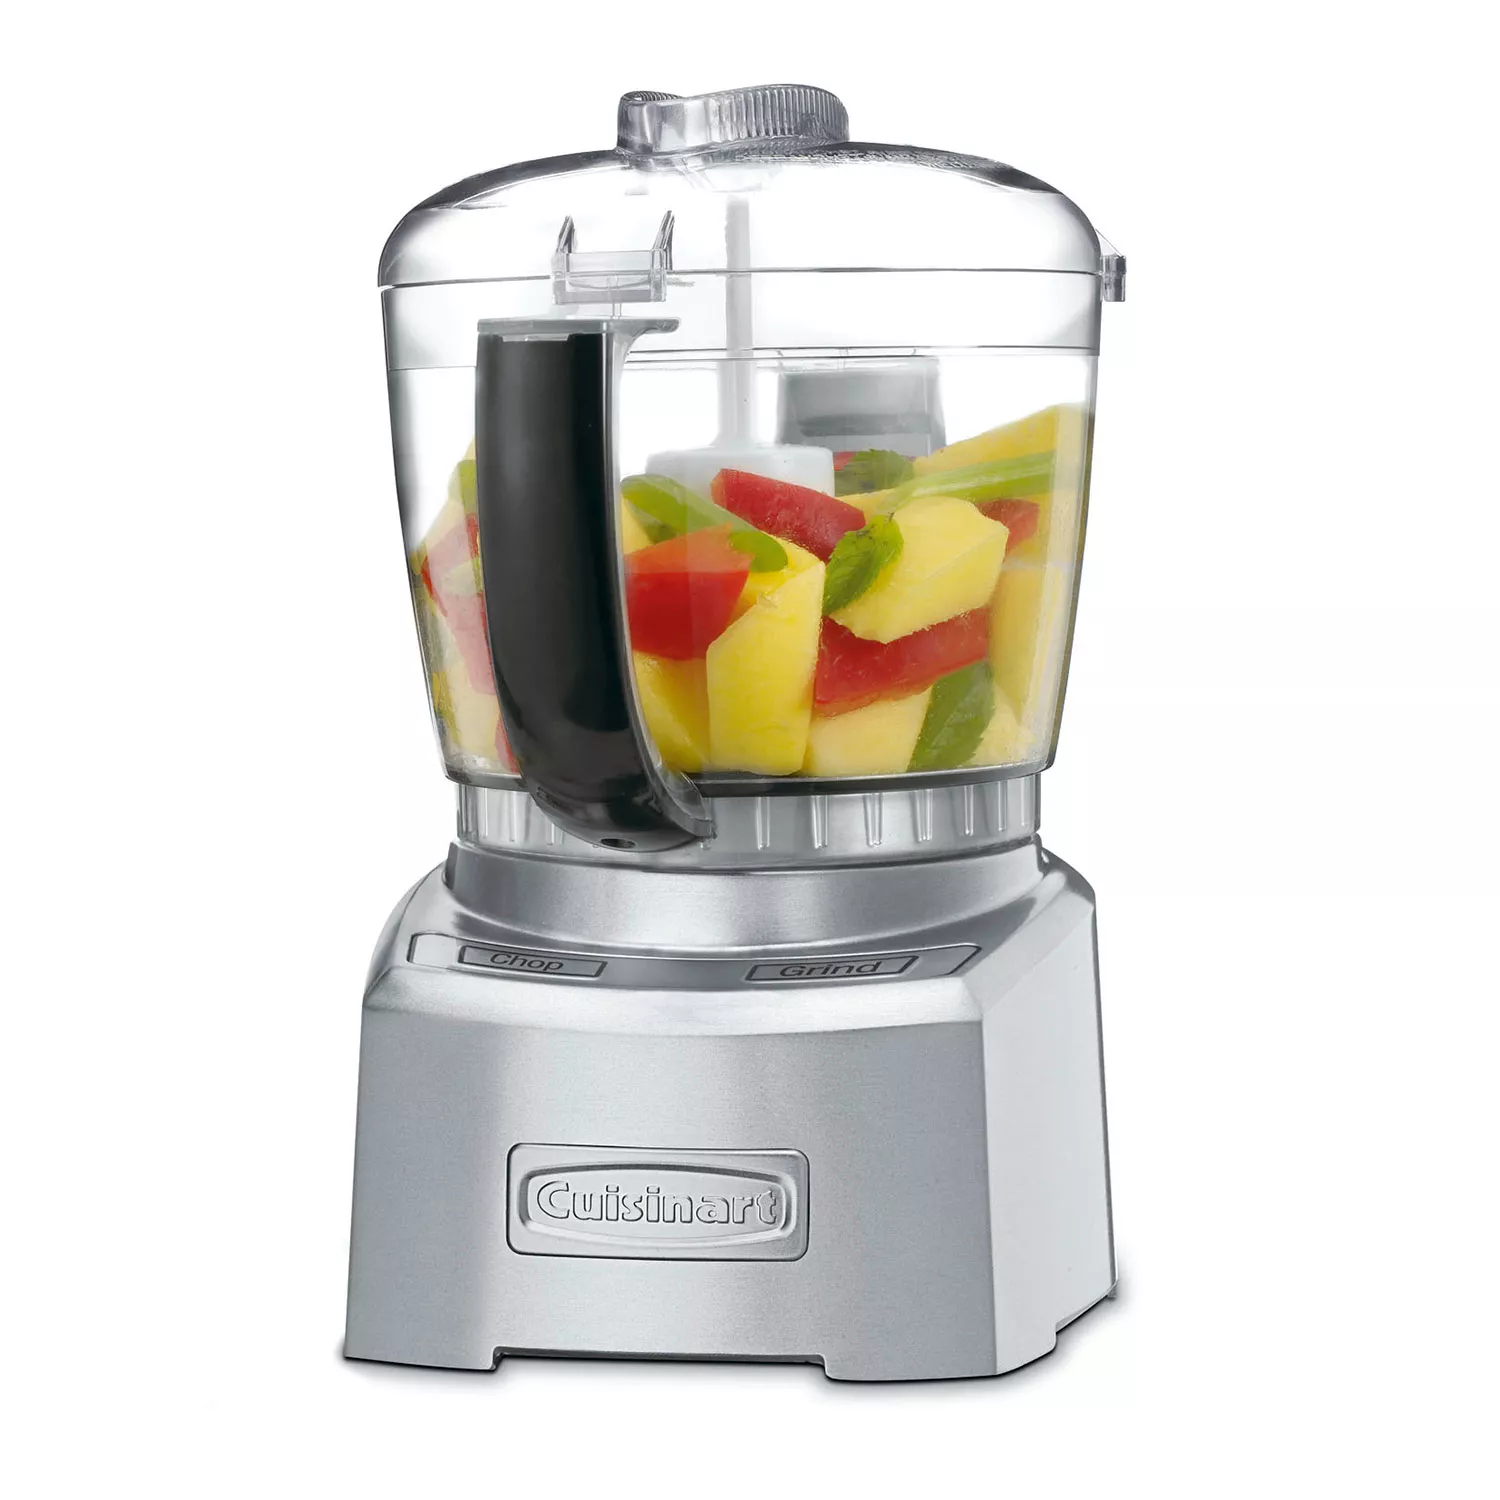 Cuisinart Elite 4-Cup Chopper and Grinder